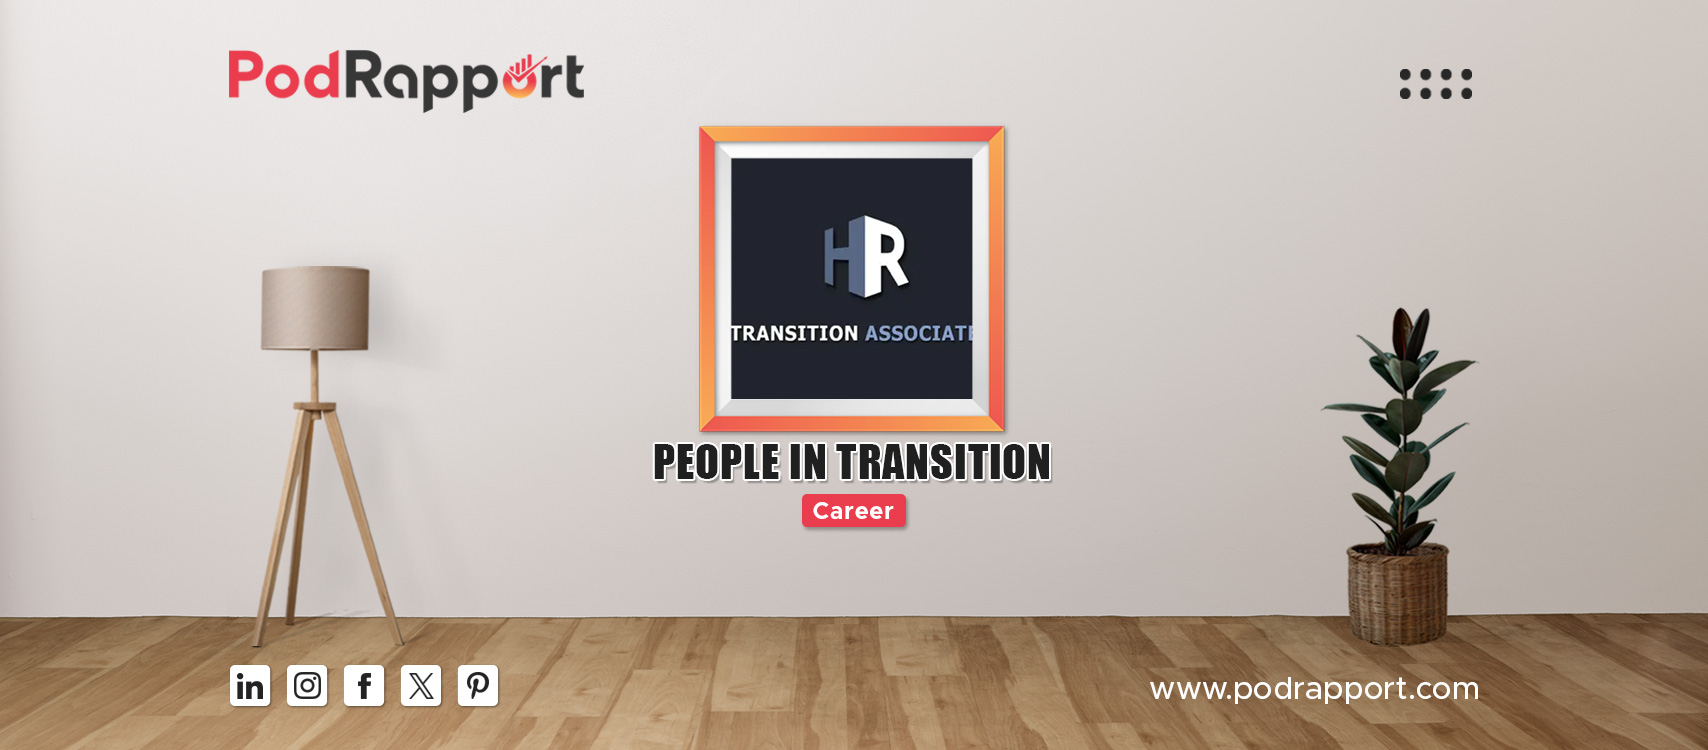 People in Transition